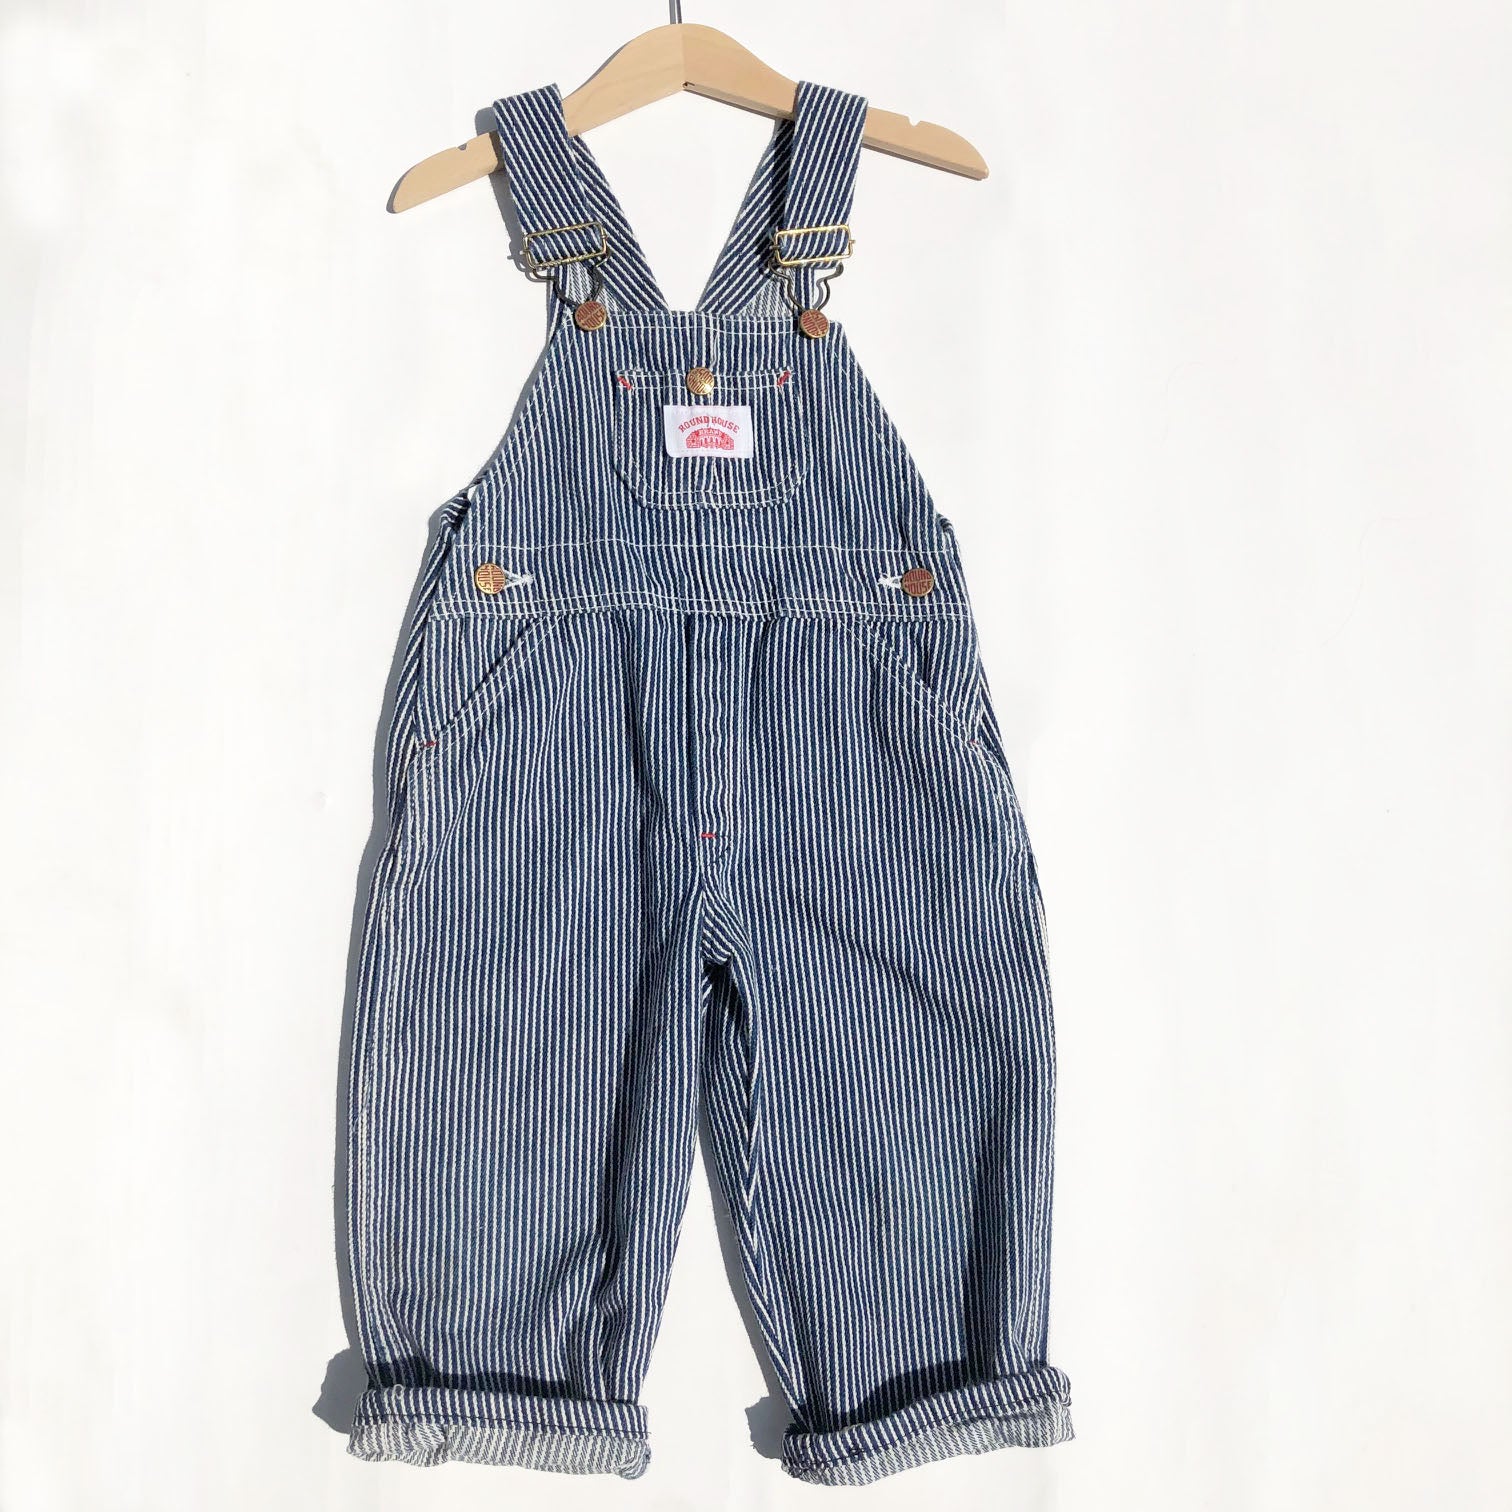 Round House Vintage Coveralls size 2